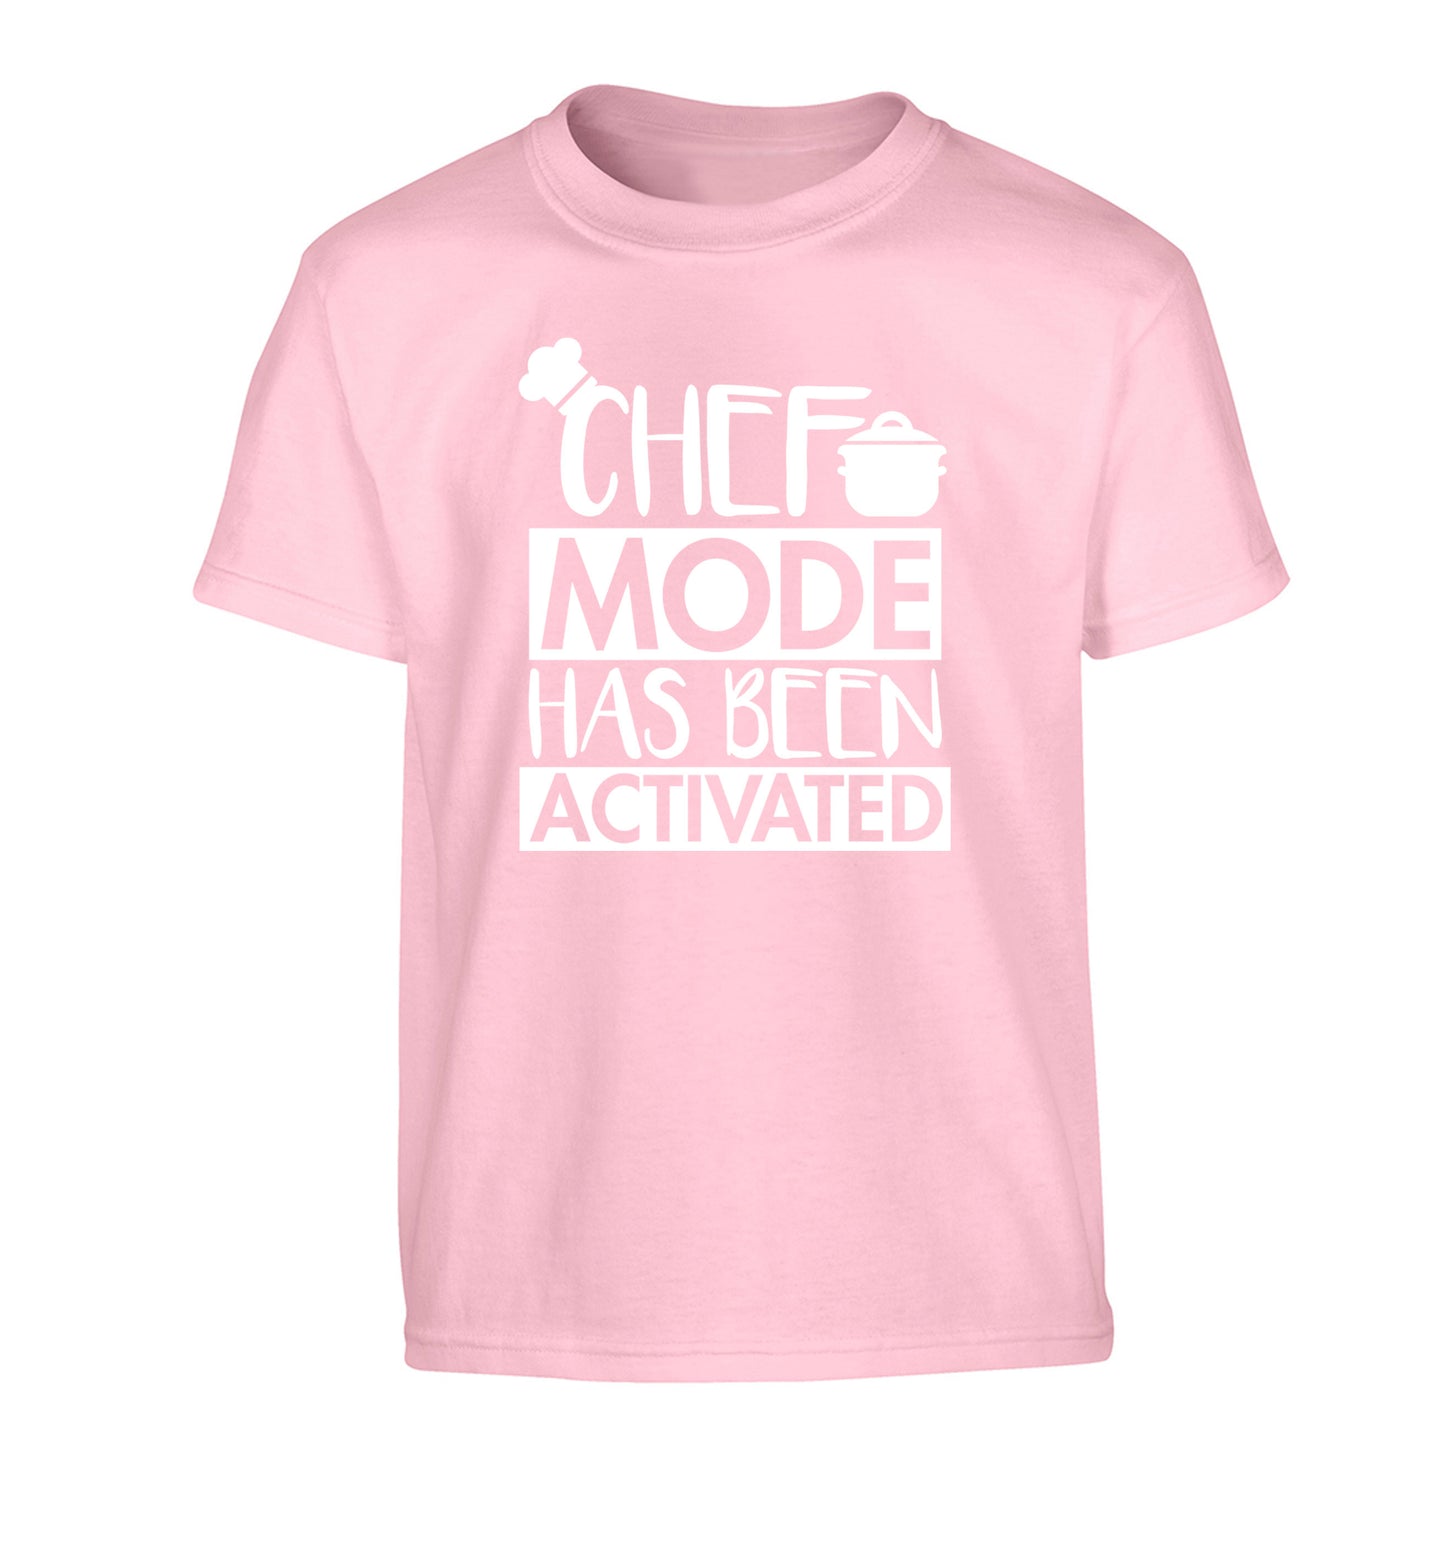 Chef mode has been activated Children's light pink Tshirt 12-14 Years